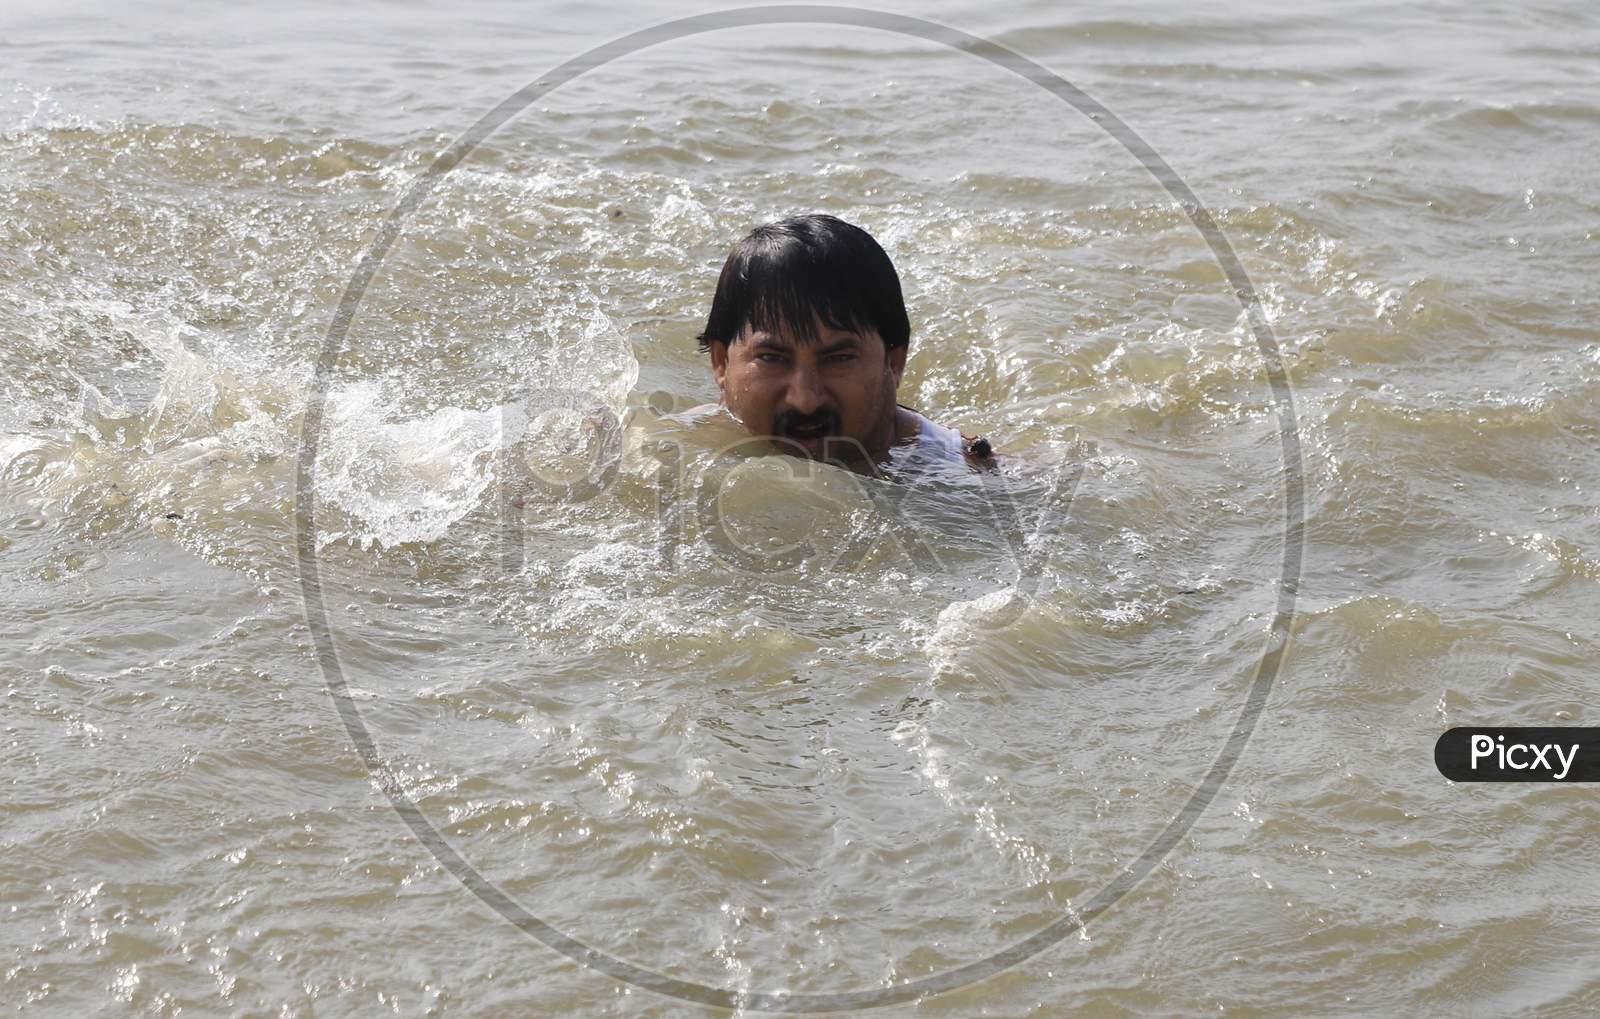 A Man  Taking Holy Bath In Triveni Sangam River on a Hot Summer Day During Extended Nationwide Lockdown Amidst Coronavirus Or COVID-19 Pandemic in Prayagraj, May 24,2020